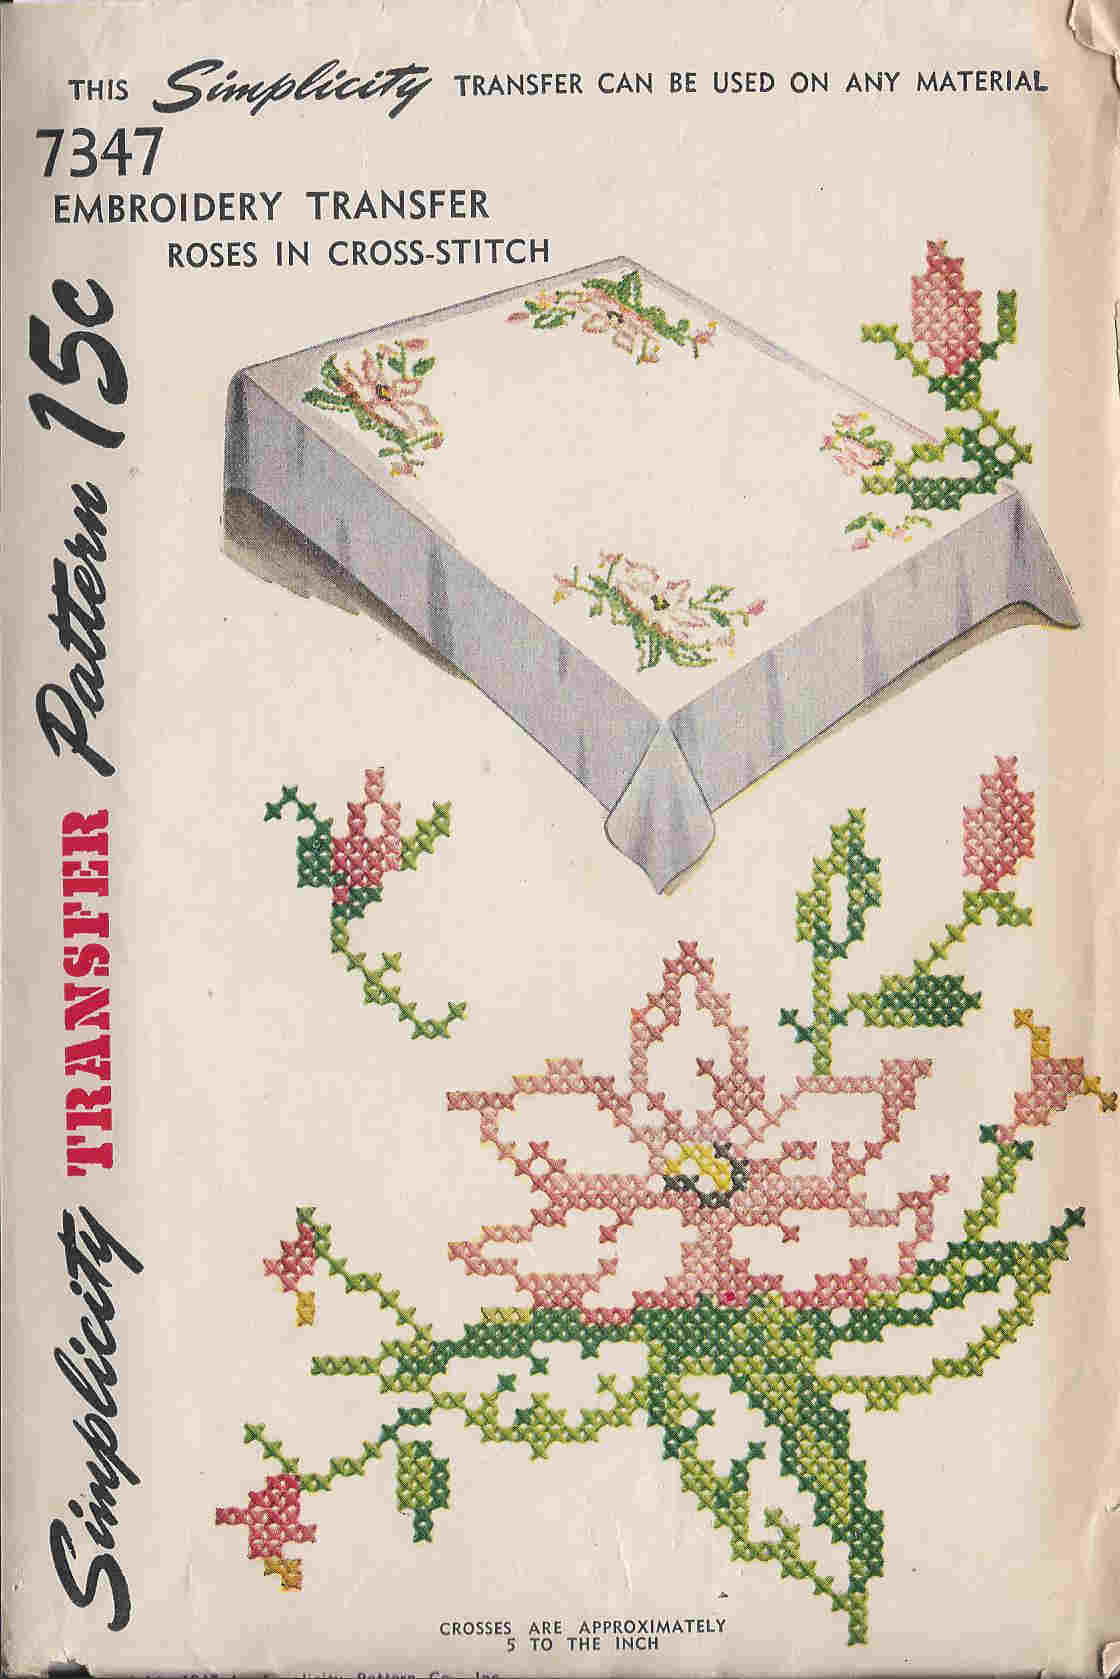 Transfer Patterns For Embroidery Dellajane Sewing Patterns Aunt Martha Transfer And Embroidery Patterns